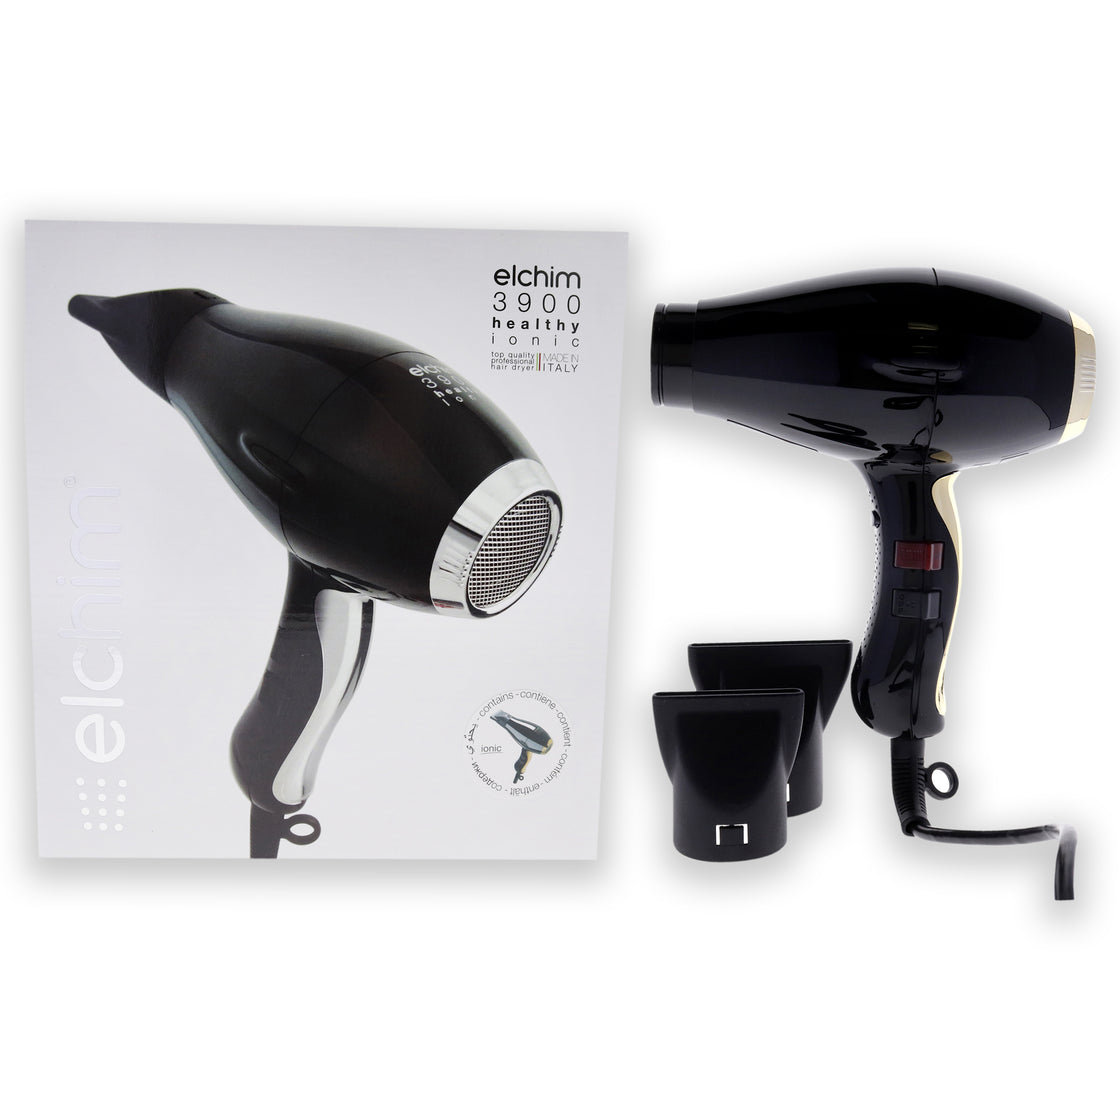 3900 Healthy Ionic Hair Dryer - Black-Gold by Elchim for Unisex - 1 Pc Hair Dryer